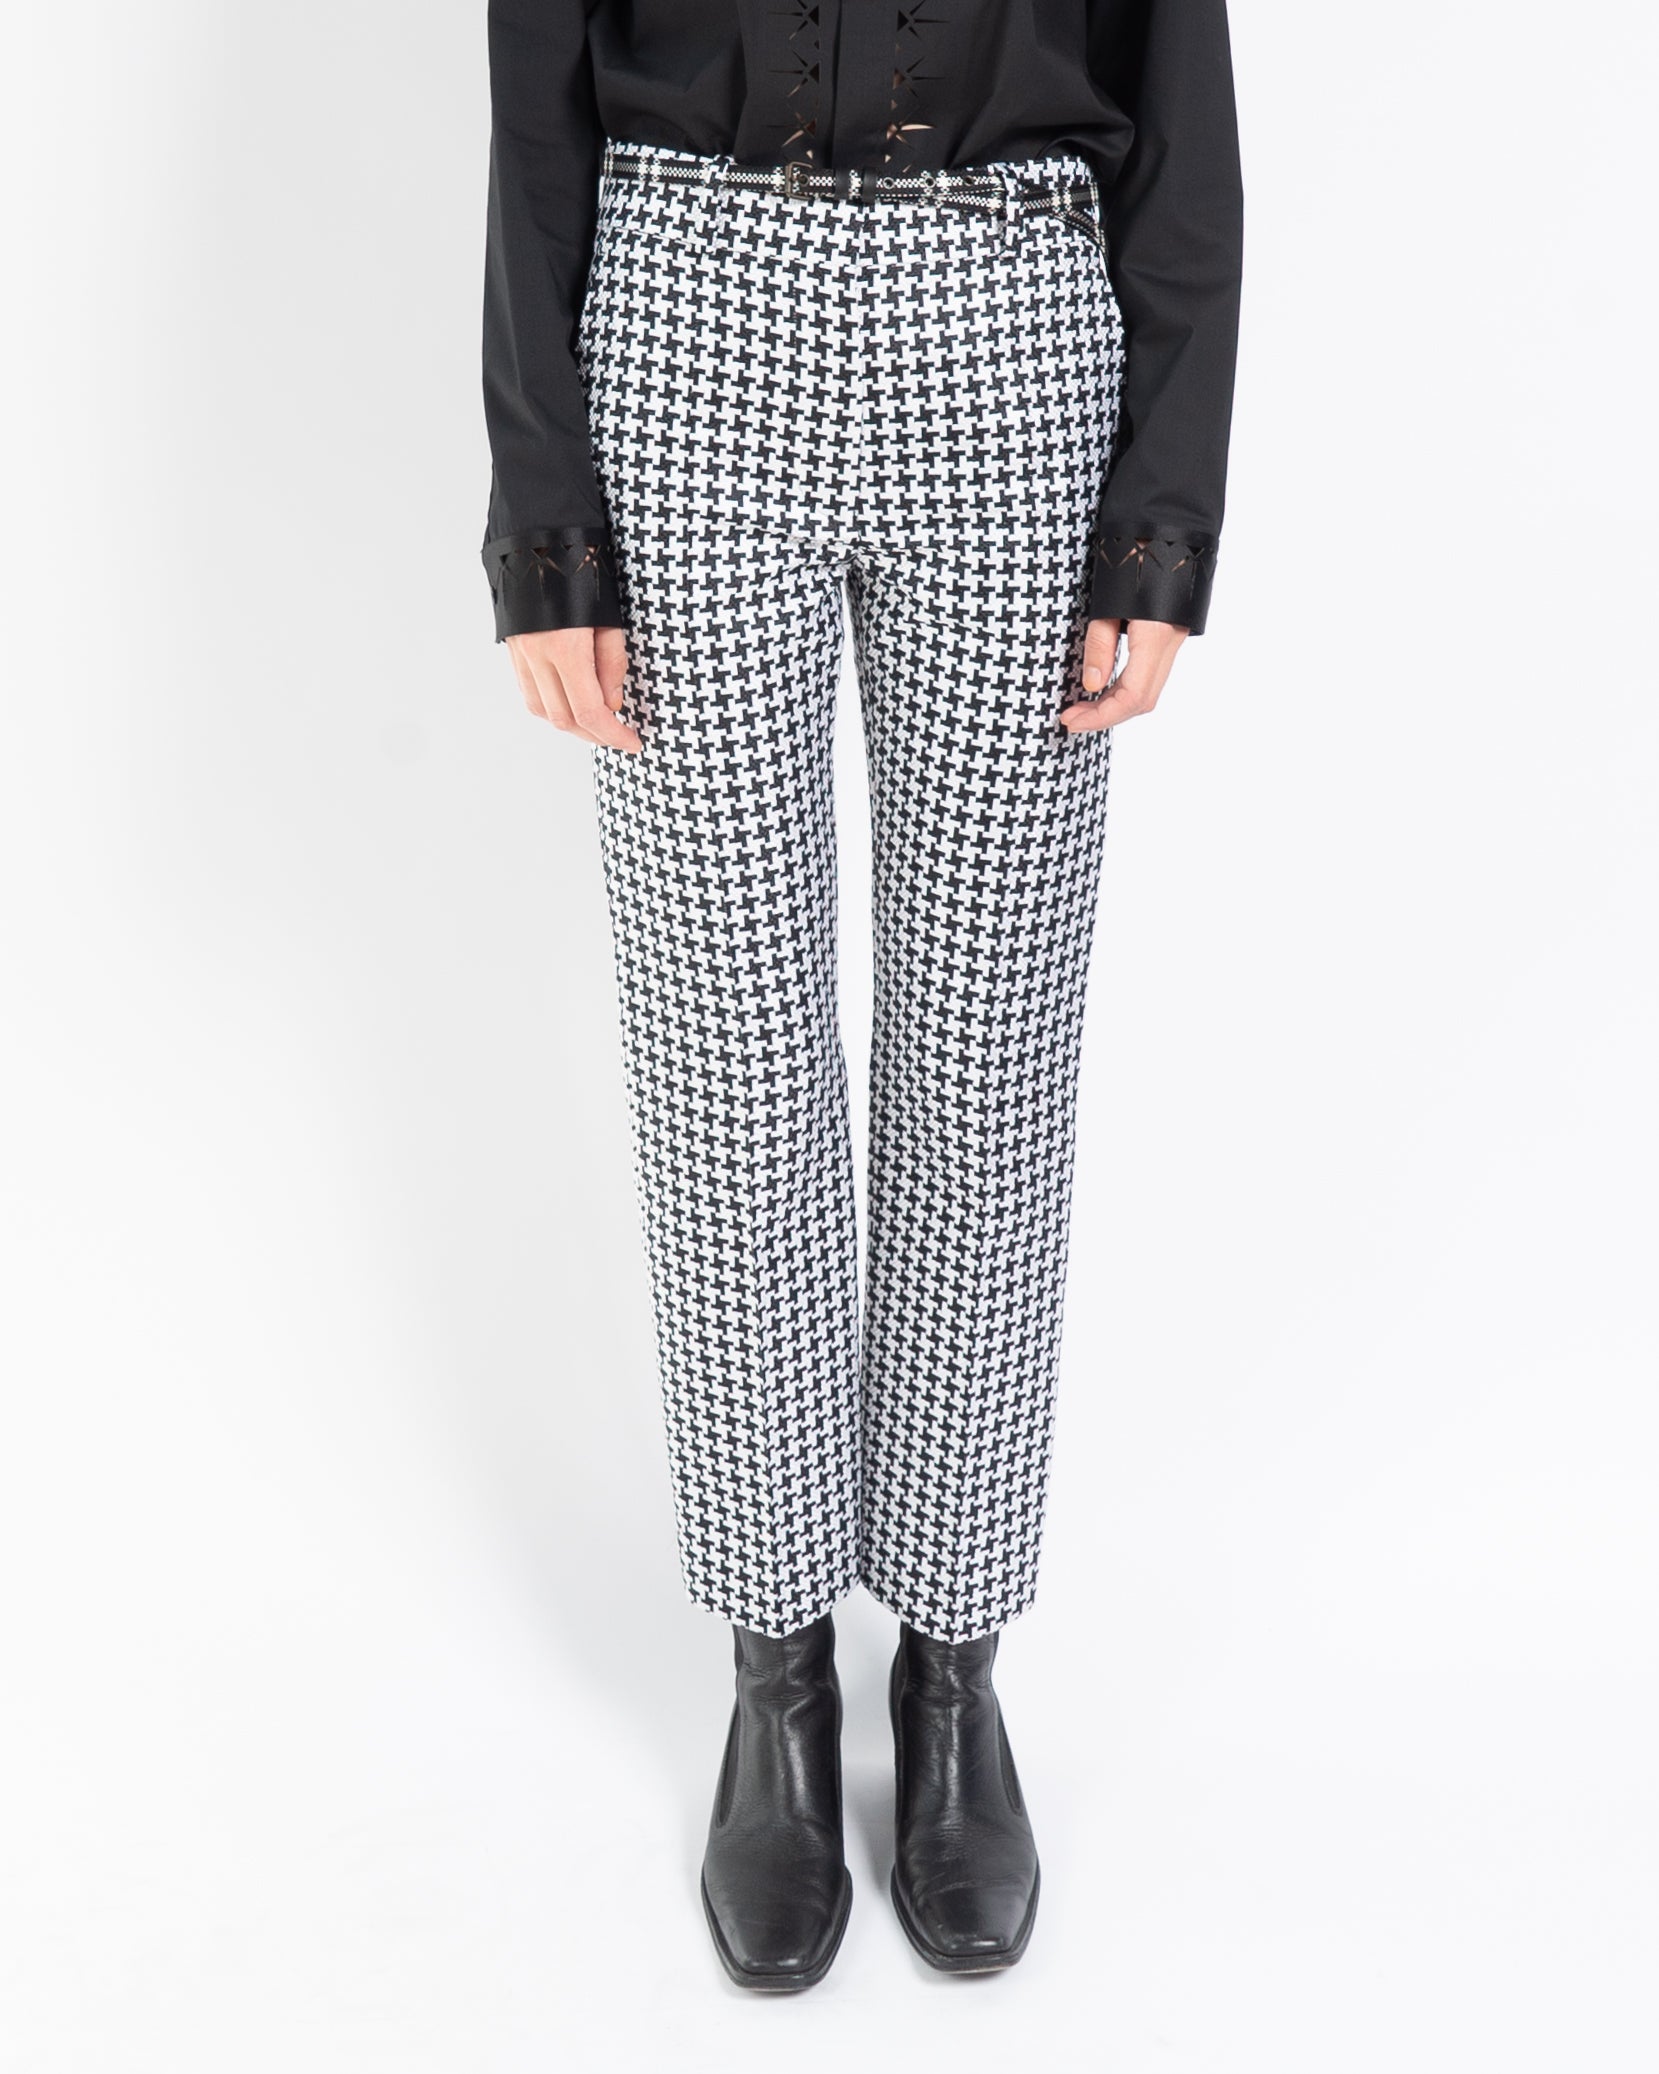 SS19 Black & White Houndstooth Silk Jacquard Trousers